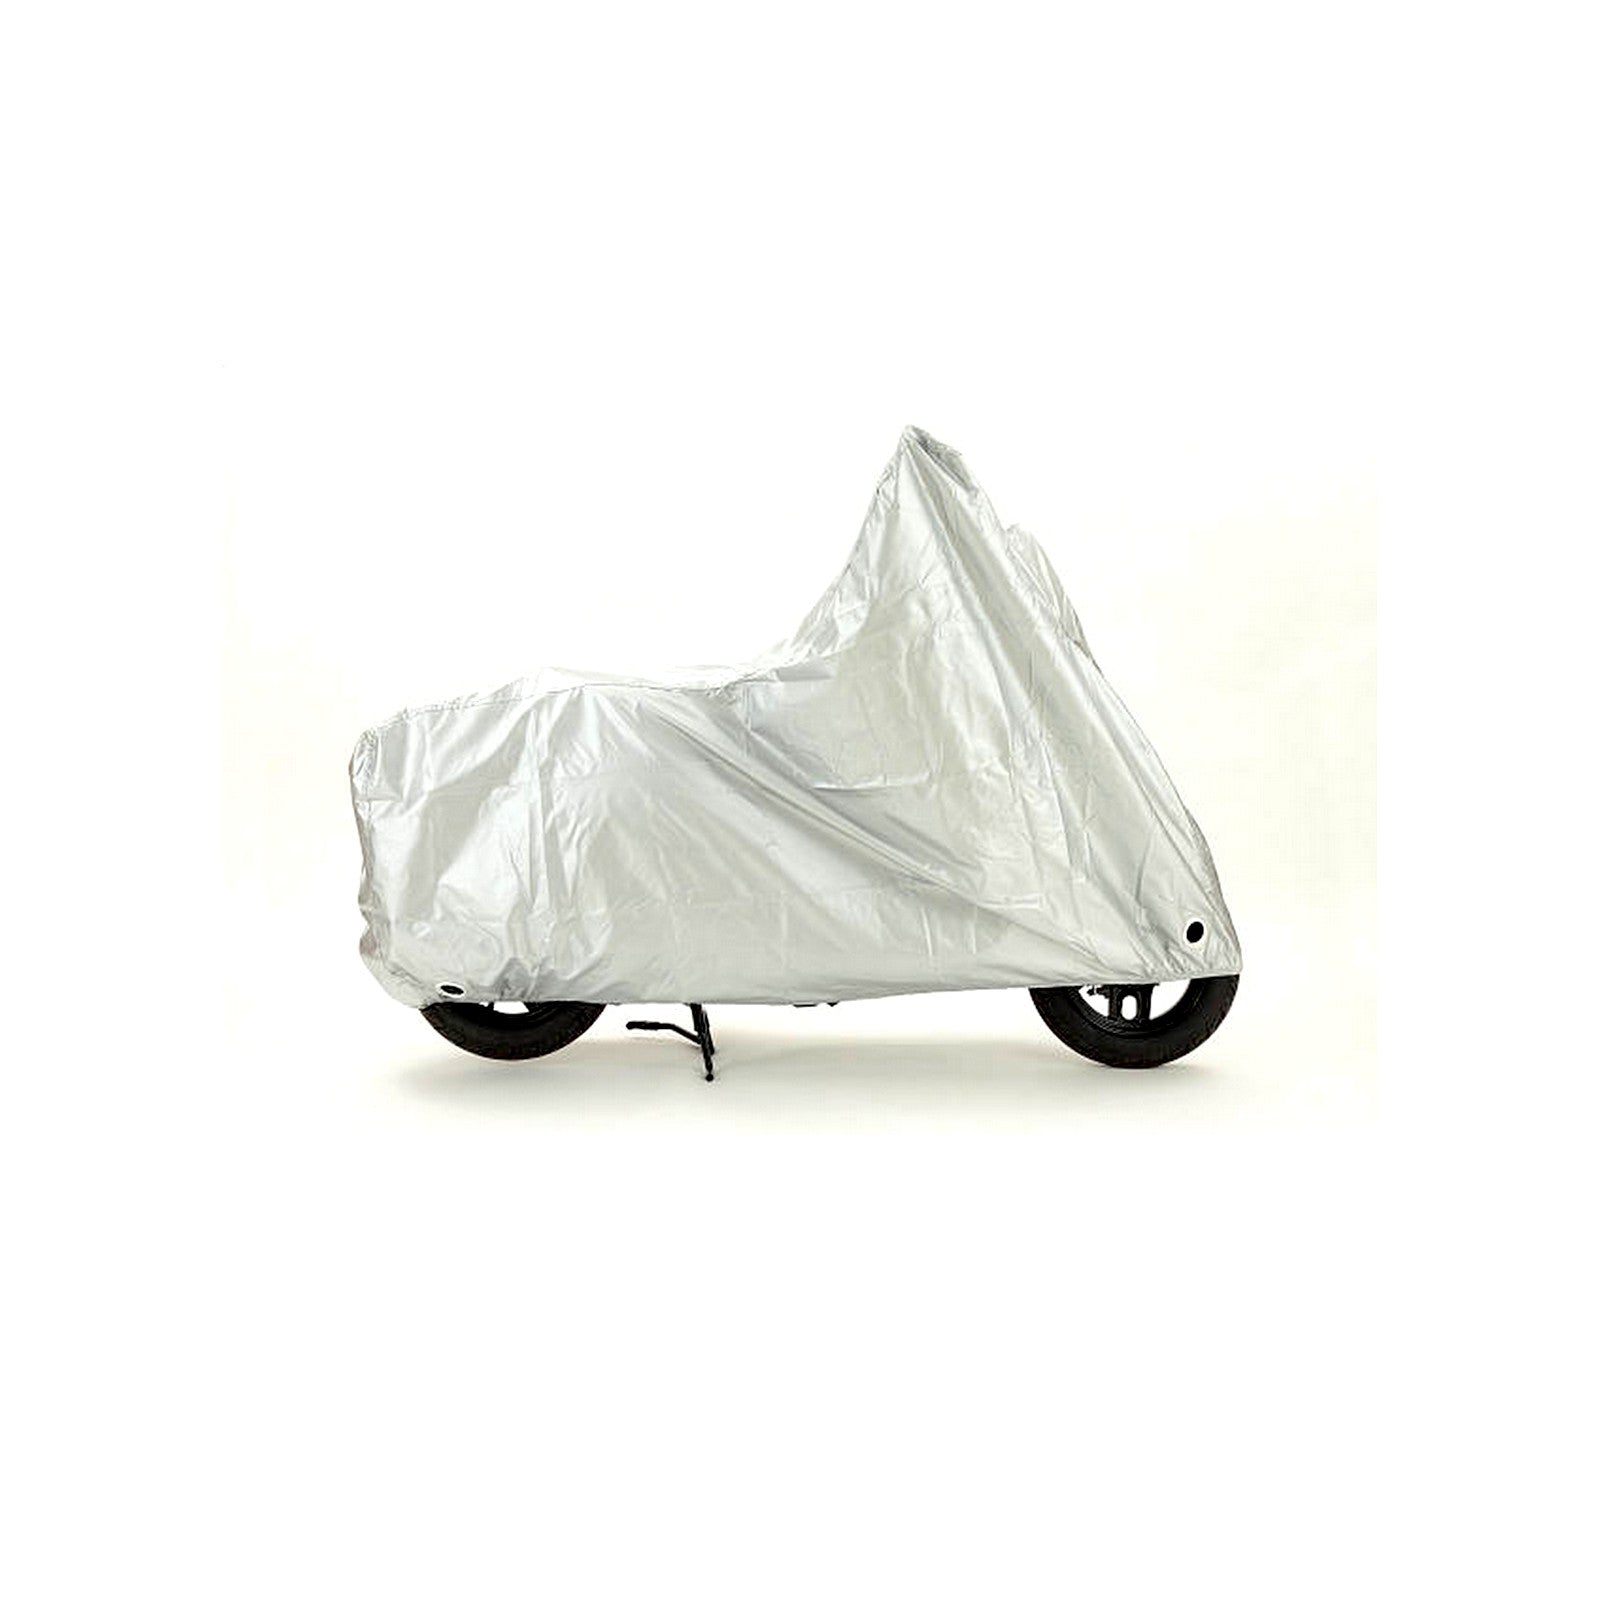 BIKE COVER TOP COVER PREMIUM QUALITY FOR MOTORCYCLES